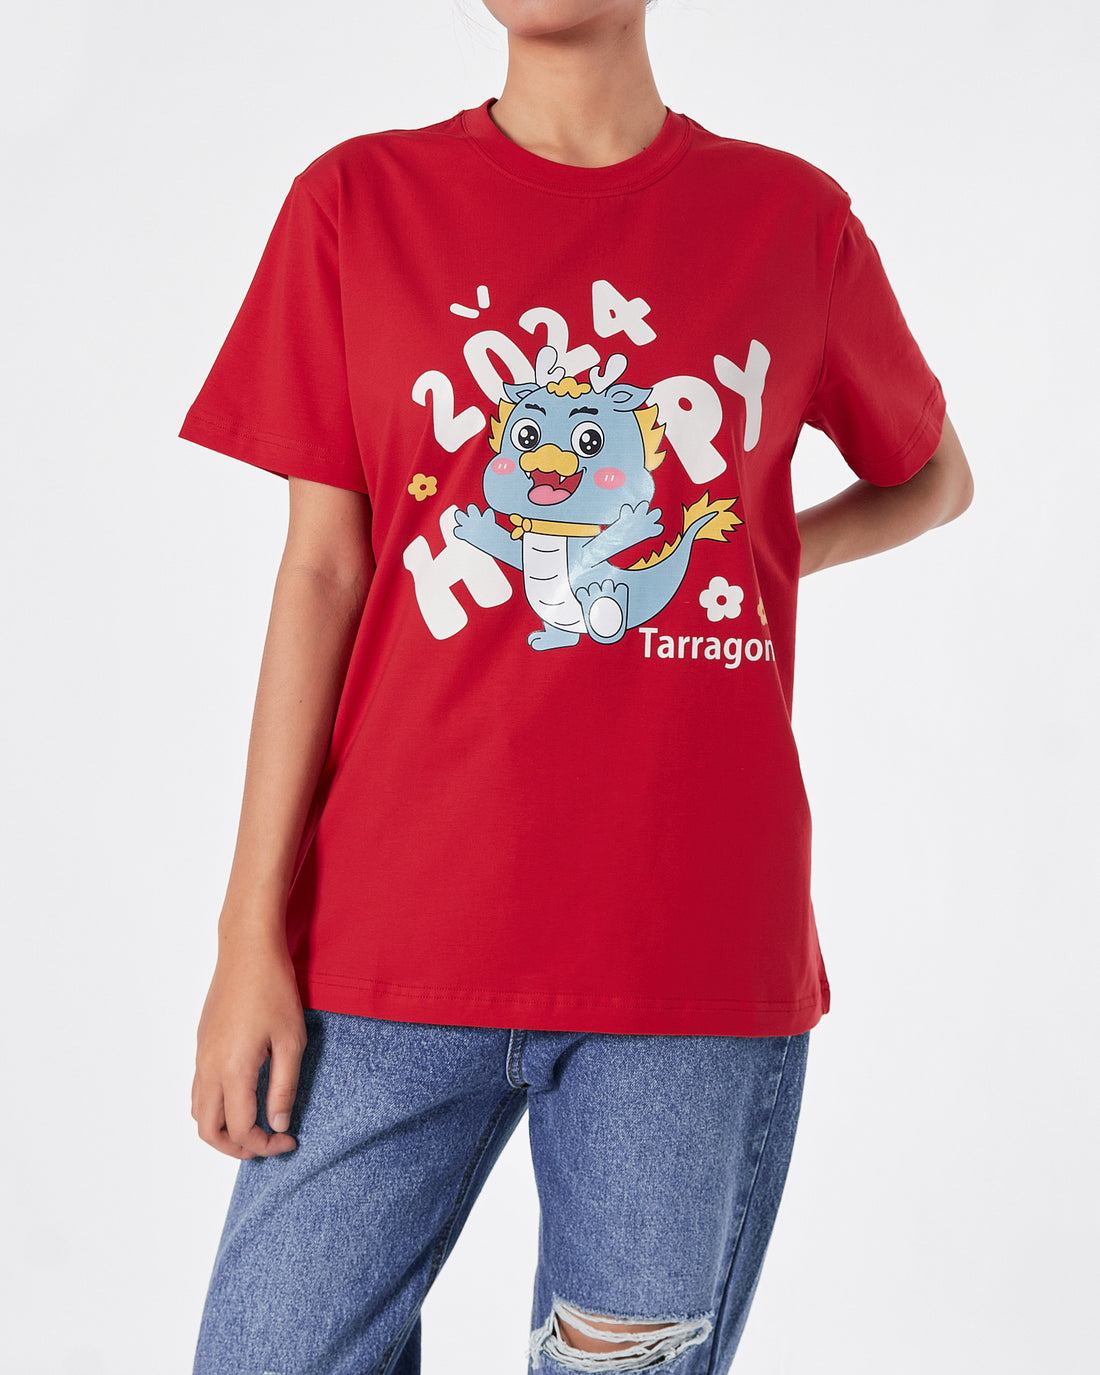 MOI Year Of The Dragon Unisex Red T-Shirt 13.90